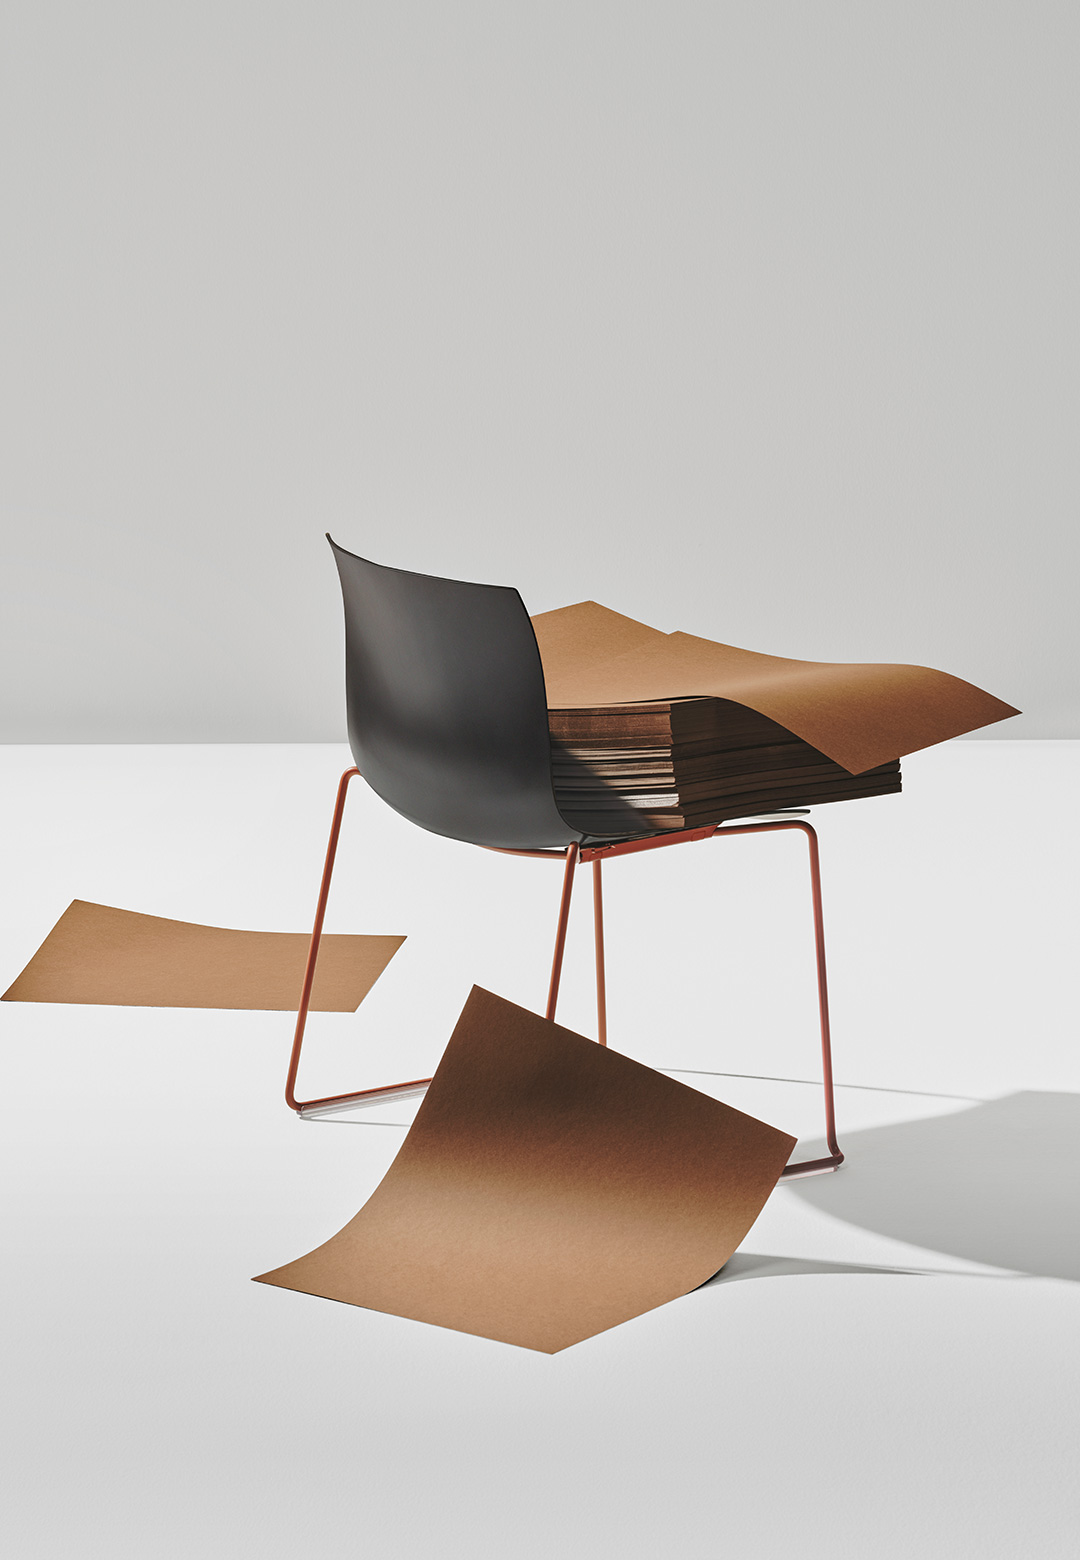 Arper and PaperShell redefine sustainability in furniture design with ‘Catifa Carta’